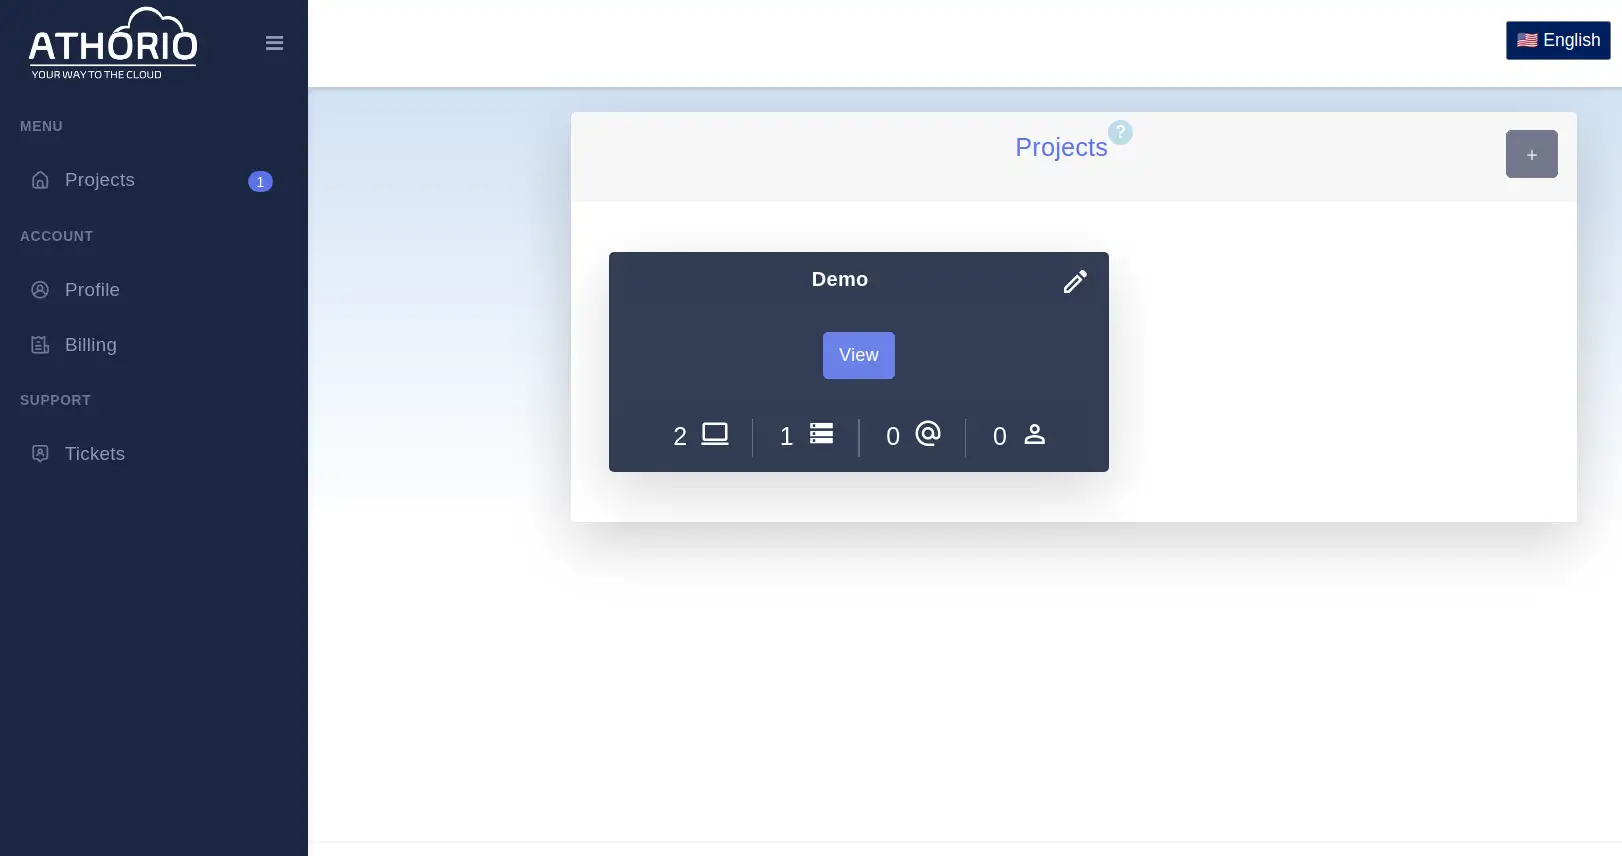 Create new project view